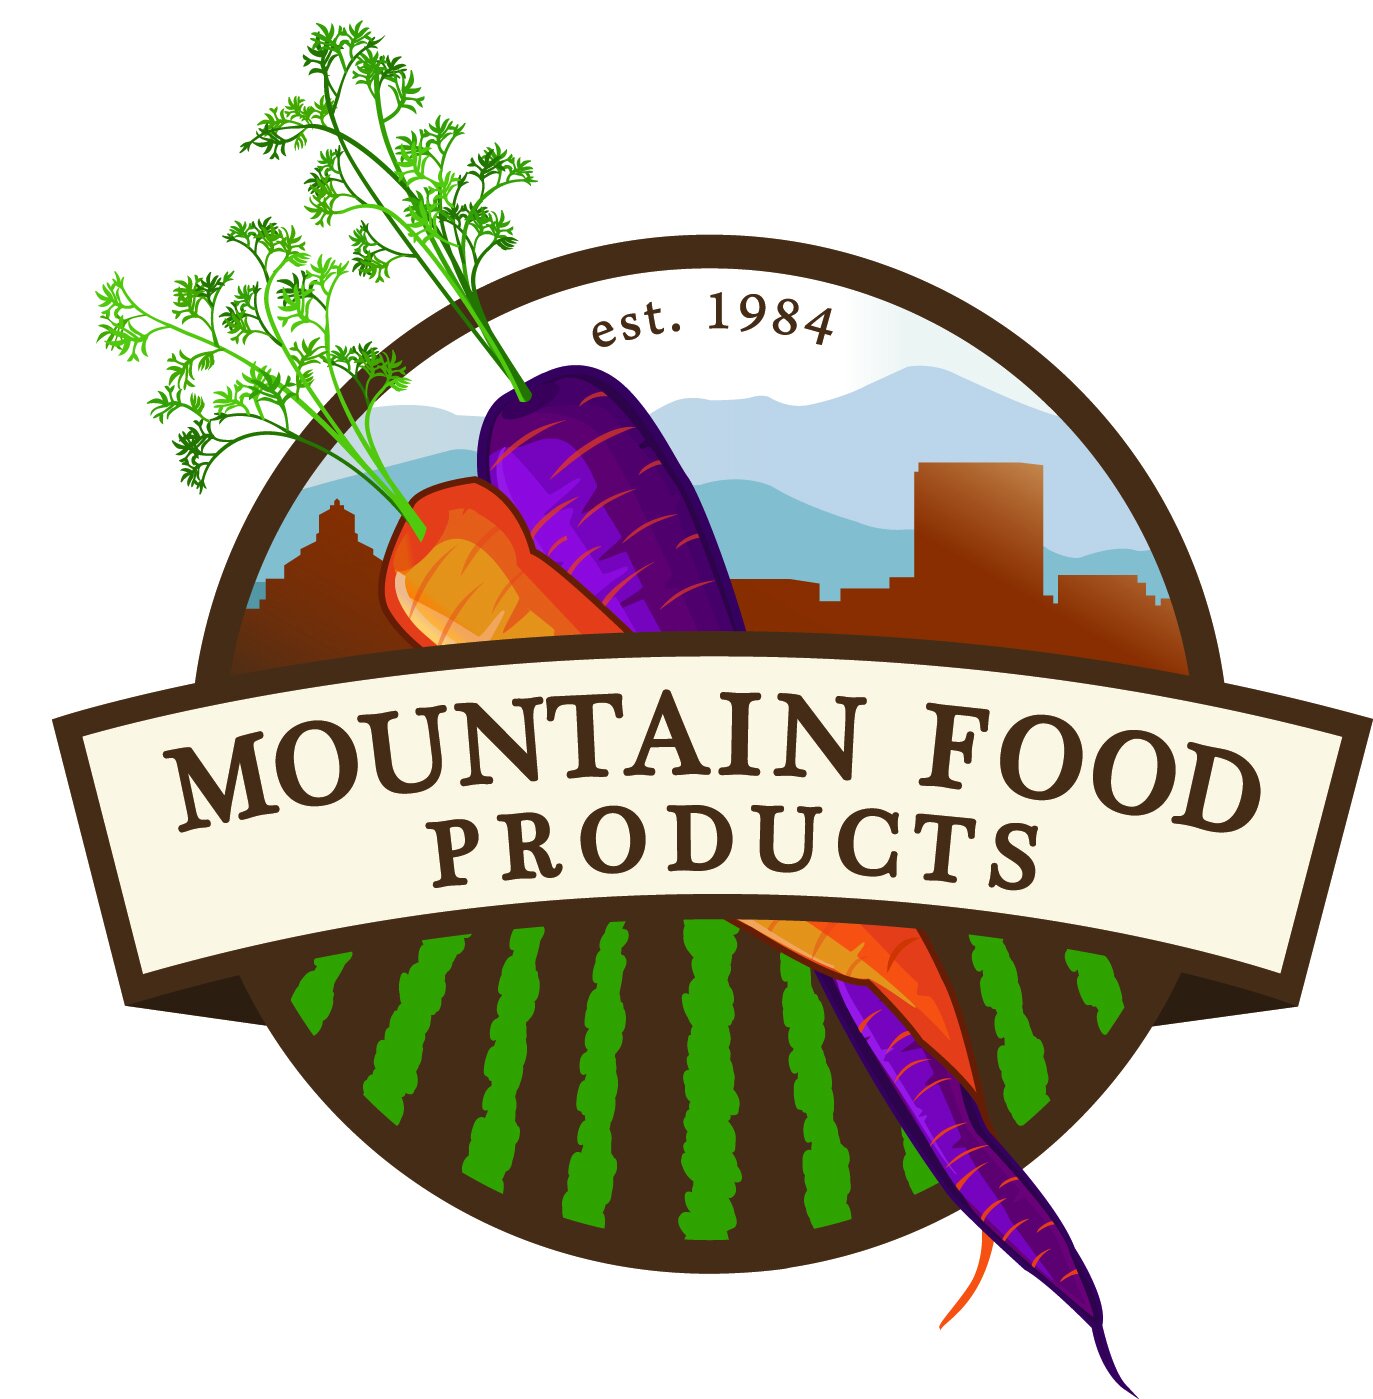 MOUNTAIN FOOD PRODUCTS